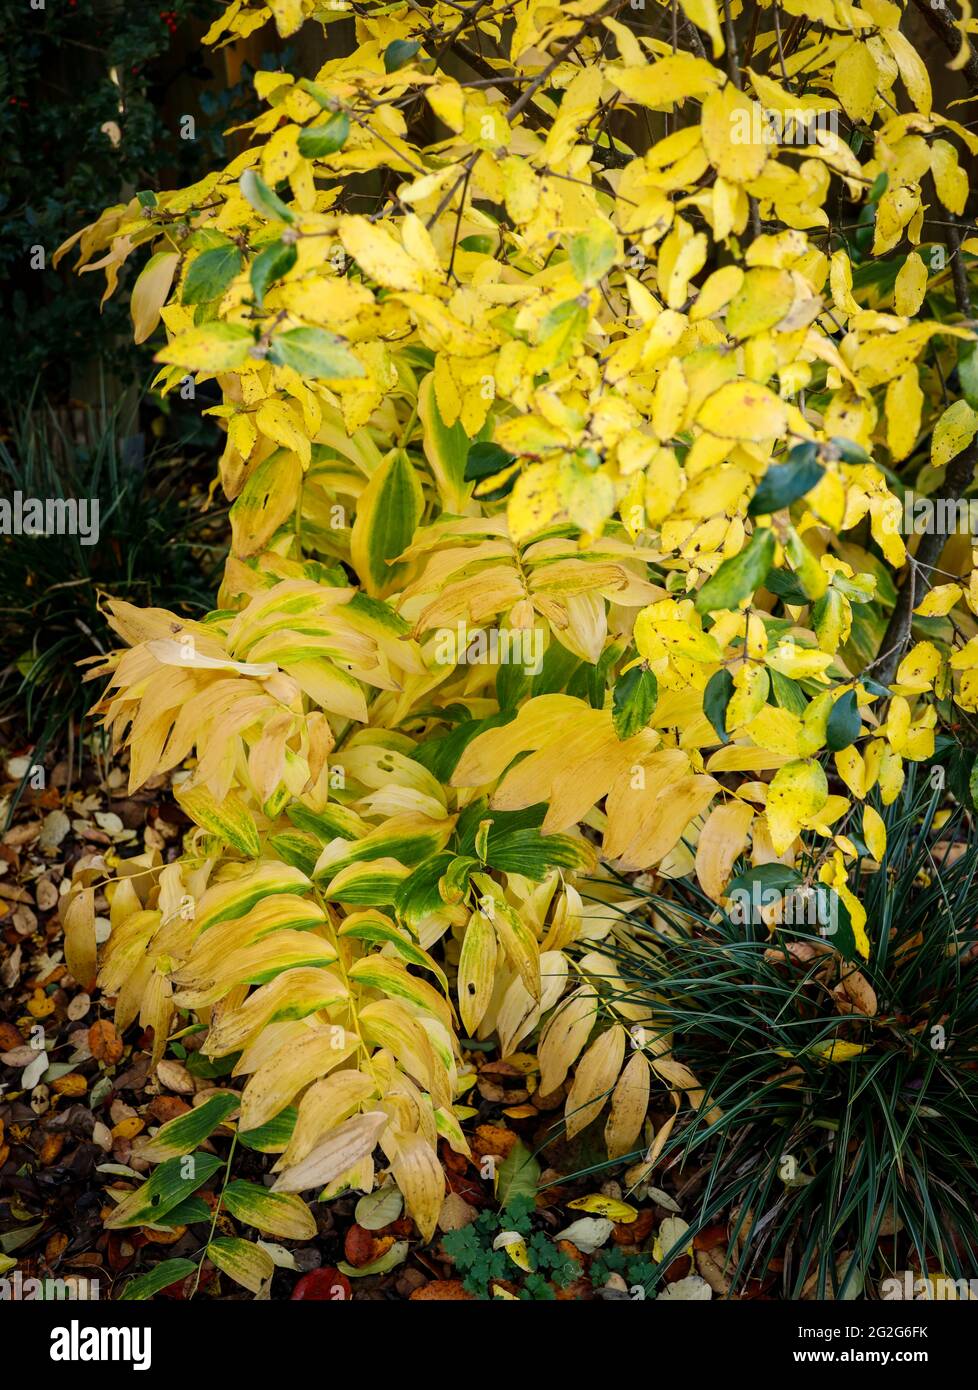 Autumn leaves from the giant lily of the valley, Stock Photo